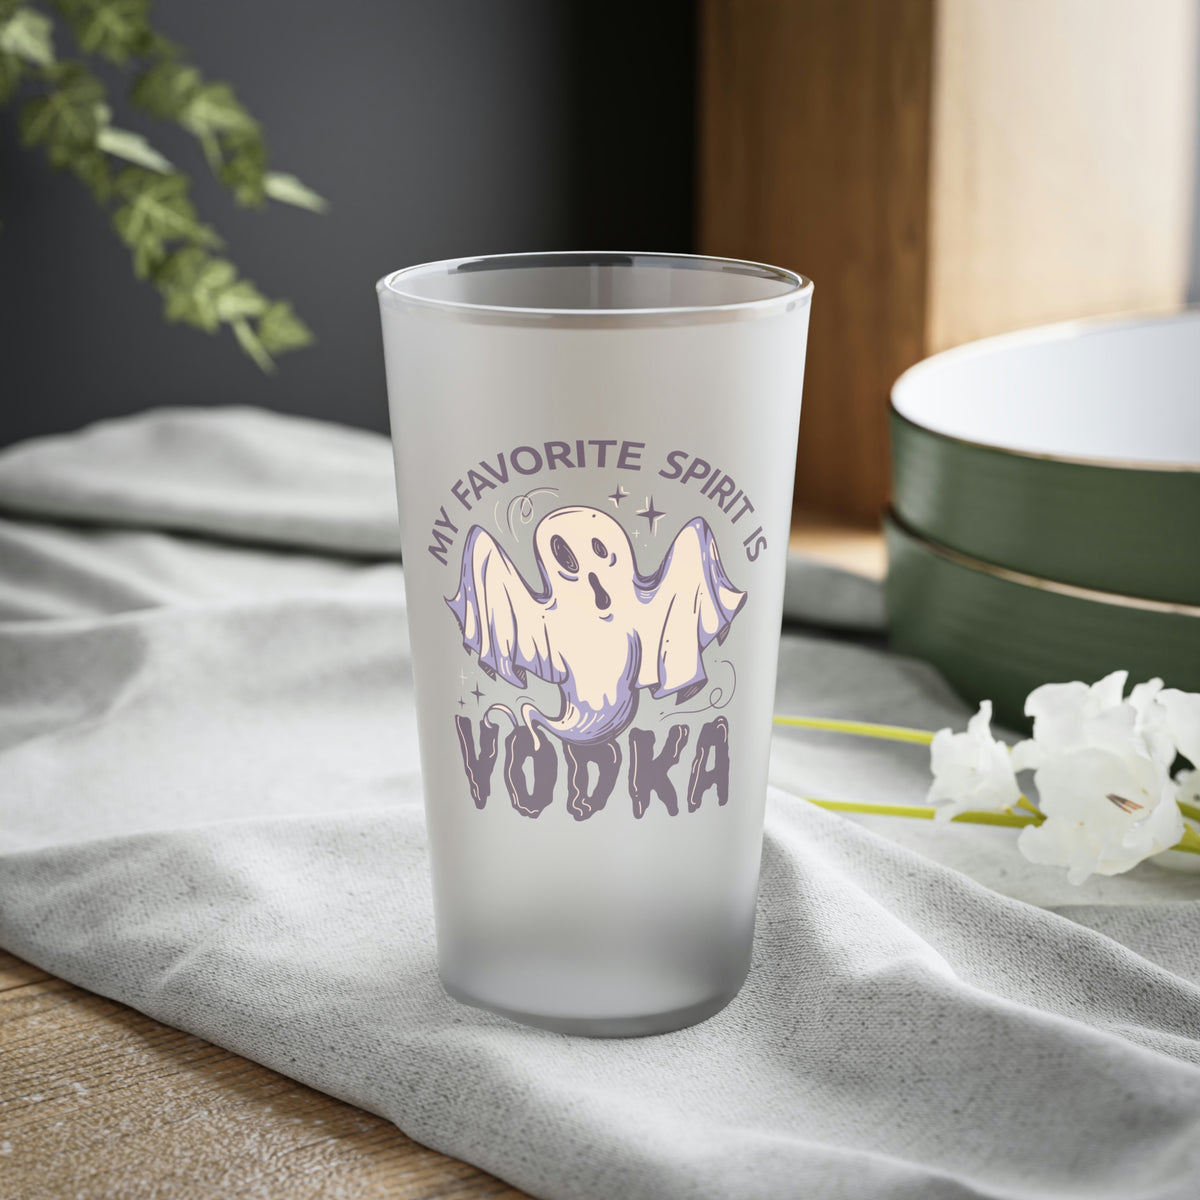 My Favorite Spirit Is Vodka Frosted Pint Glass Mug Printify 16oz Frosted 